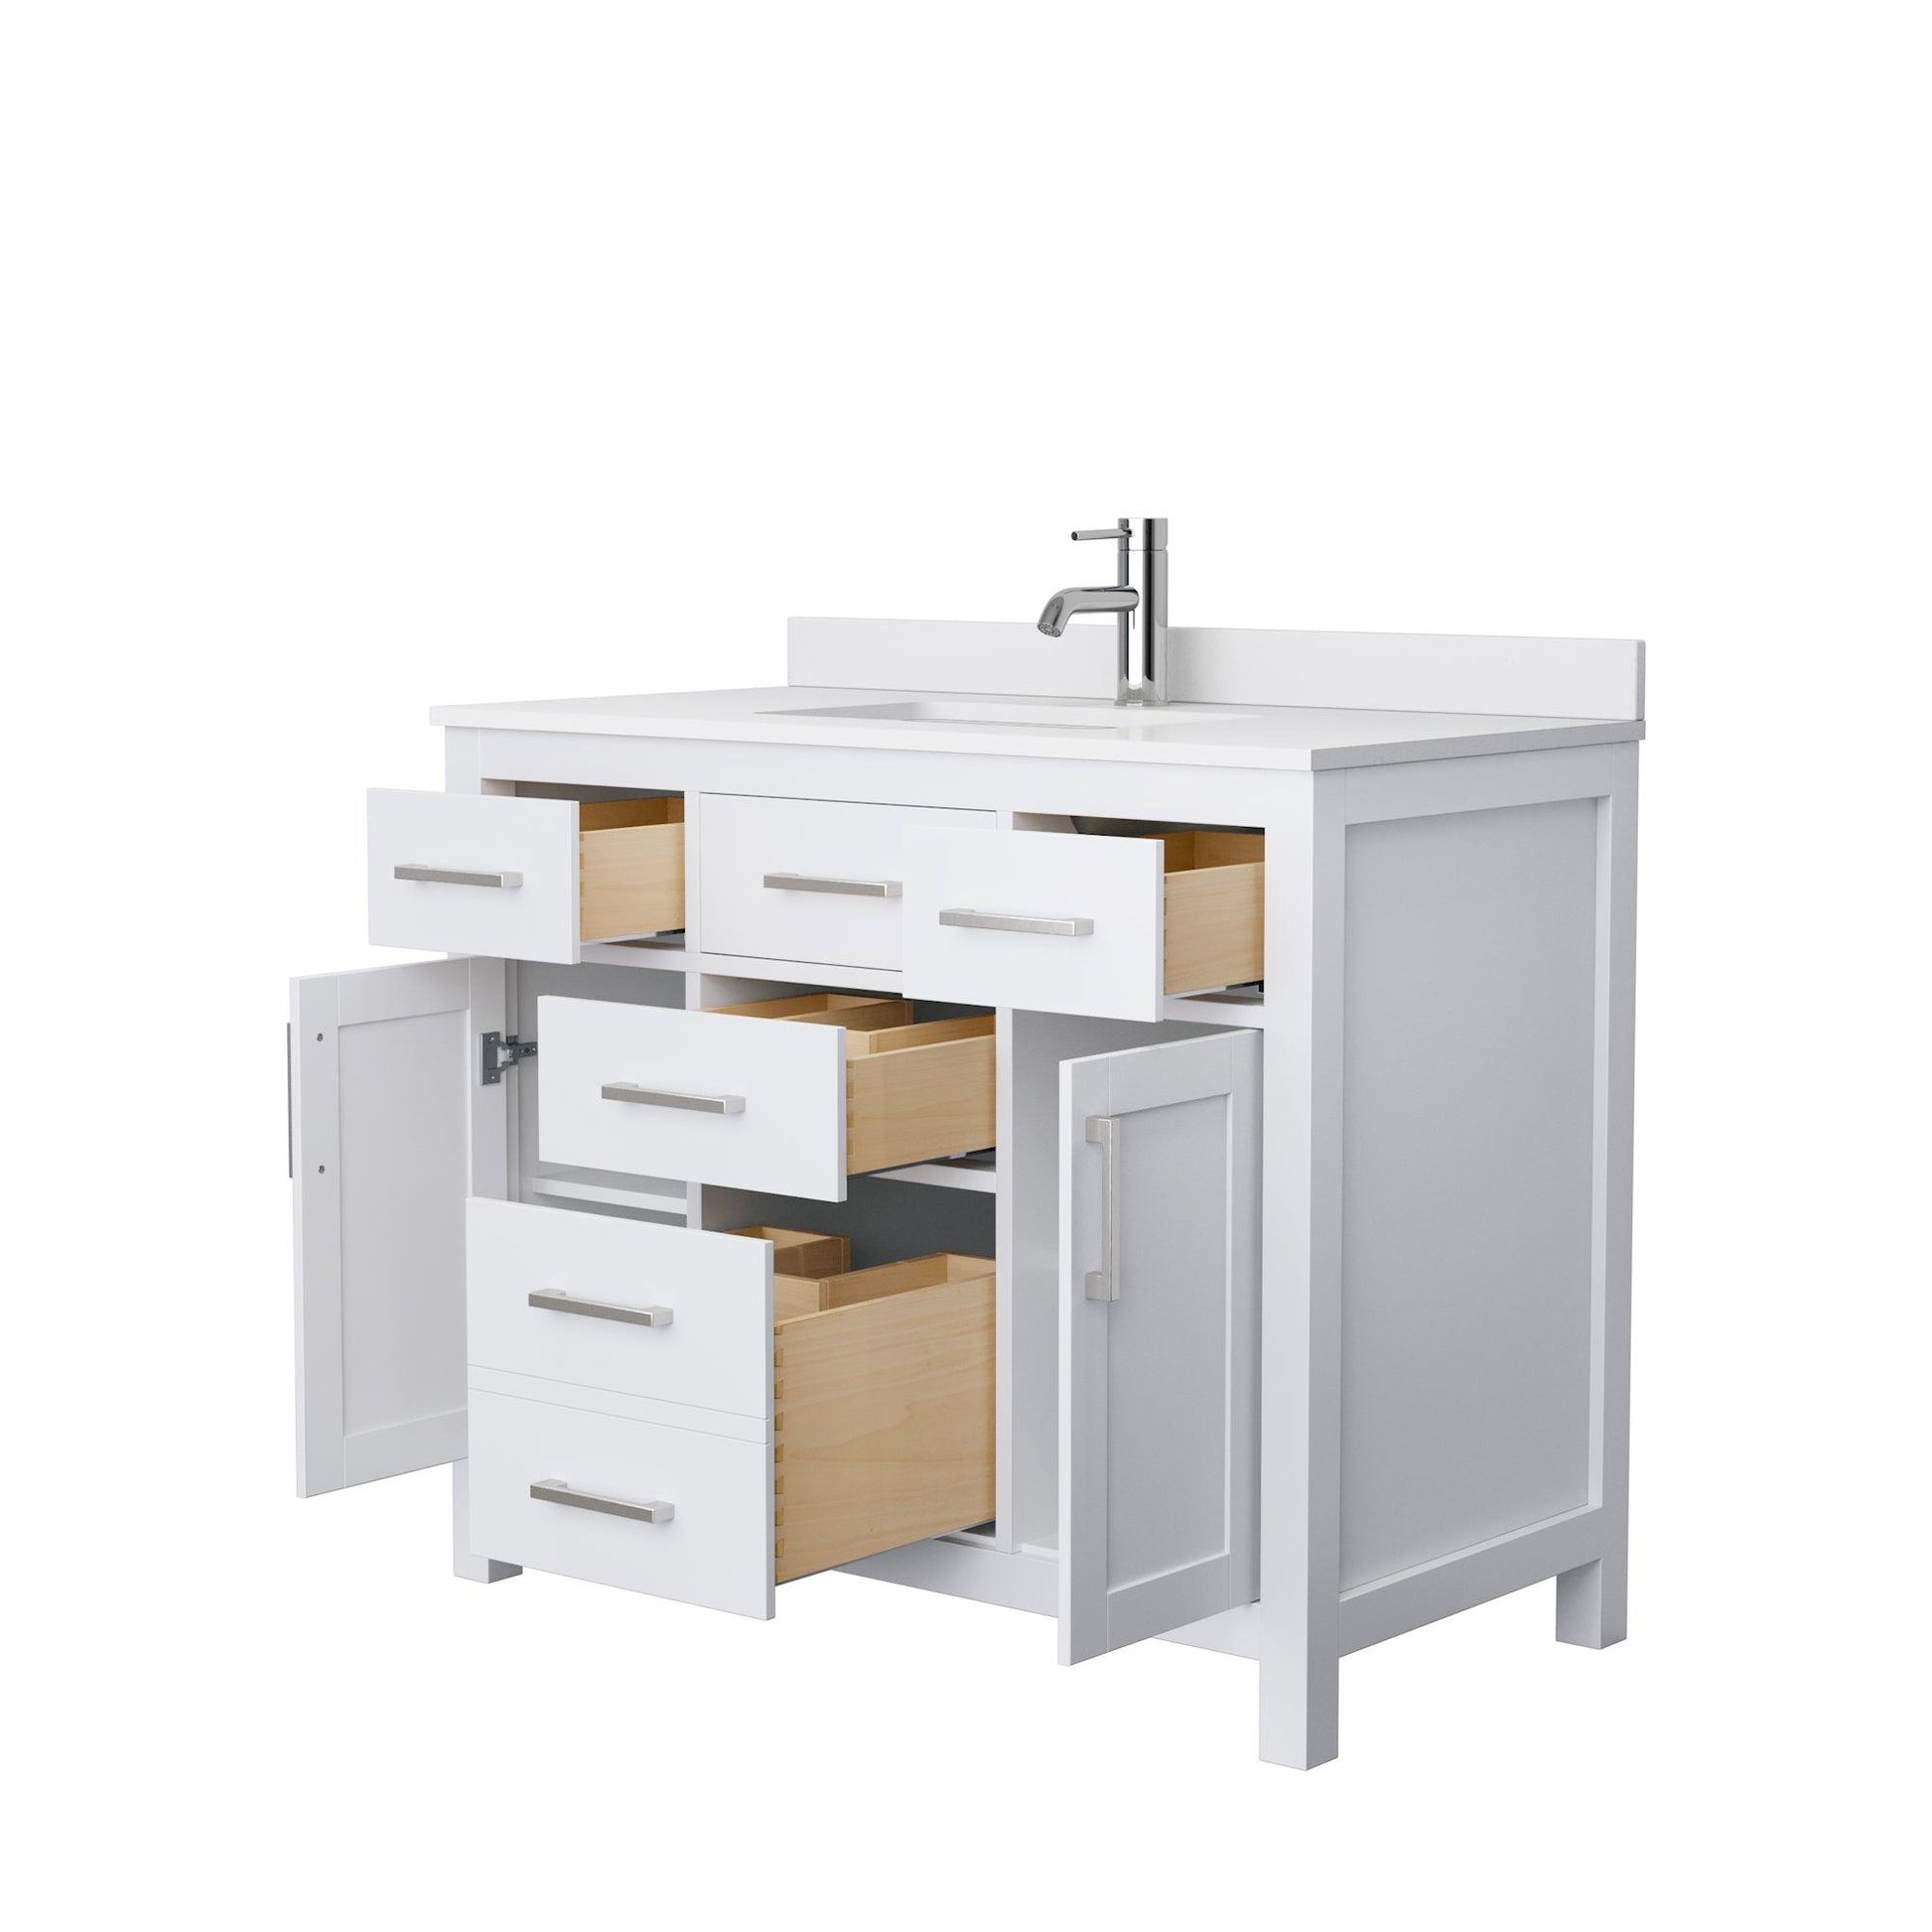 Wyndham Collection Beckett Single Bathroom Vanity with White Cultured Marble Countertop, Undermount Square Sink, No Mirror - Sea & Stone Bath